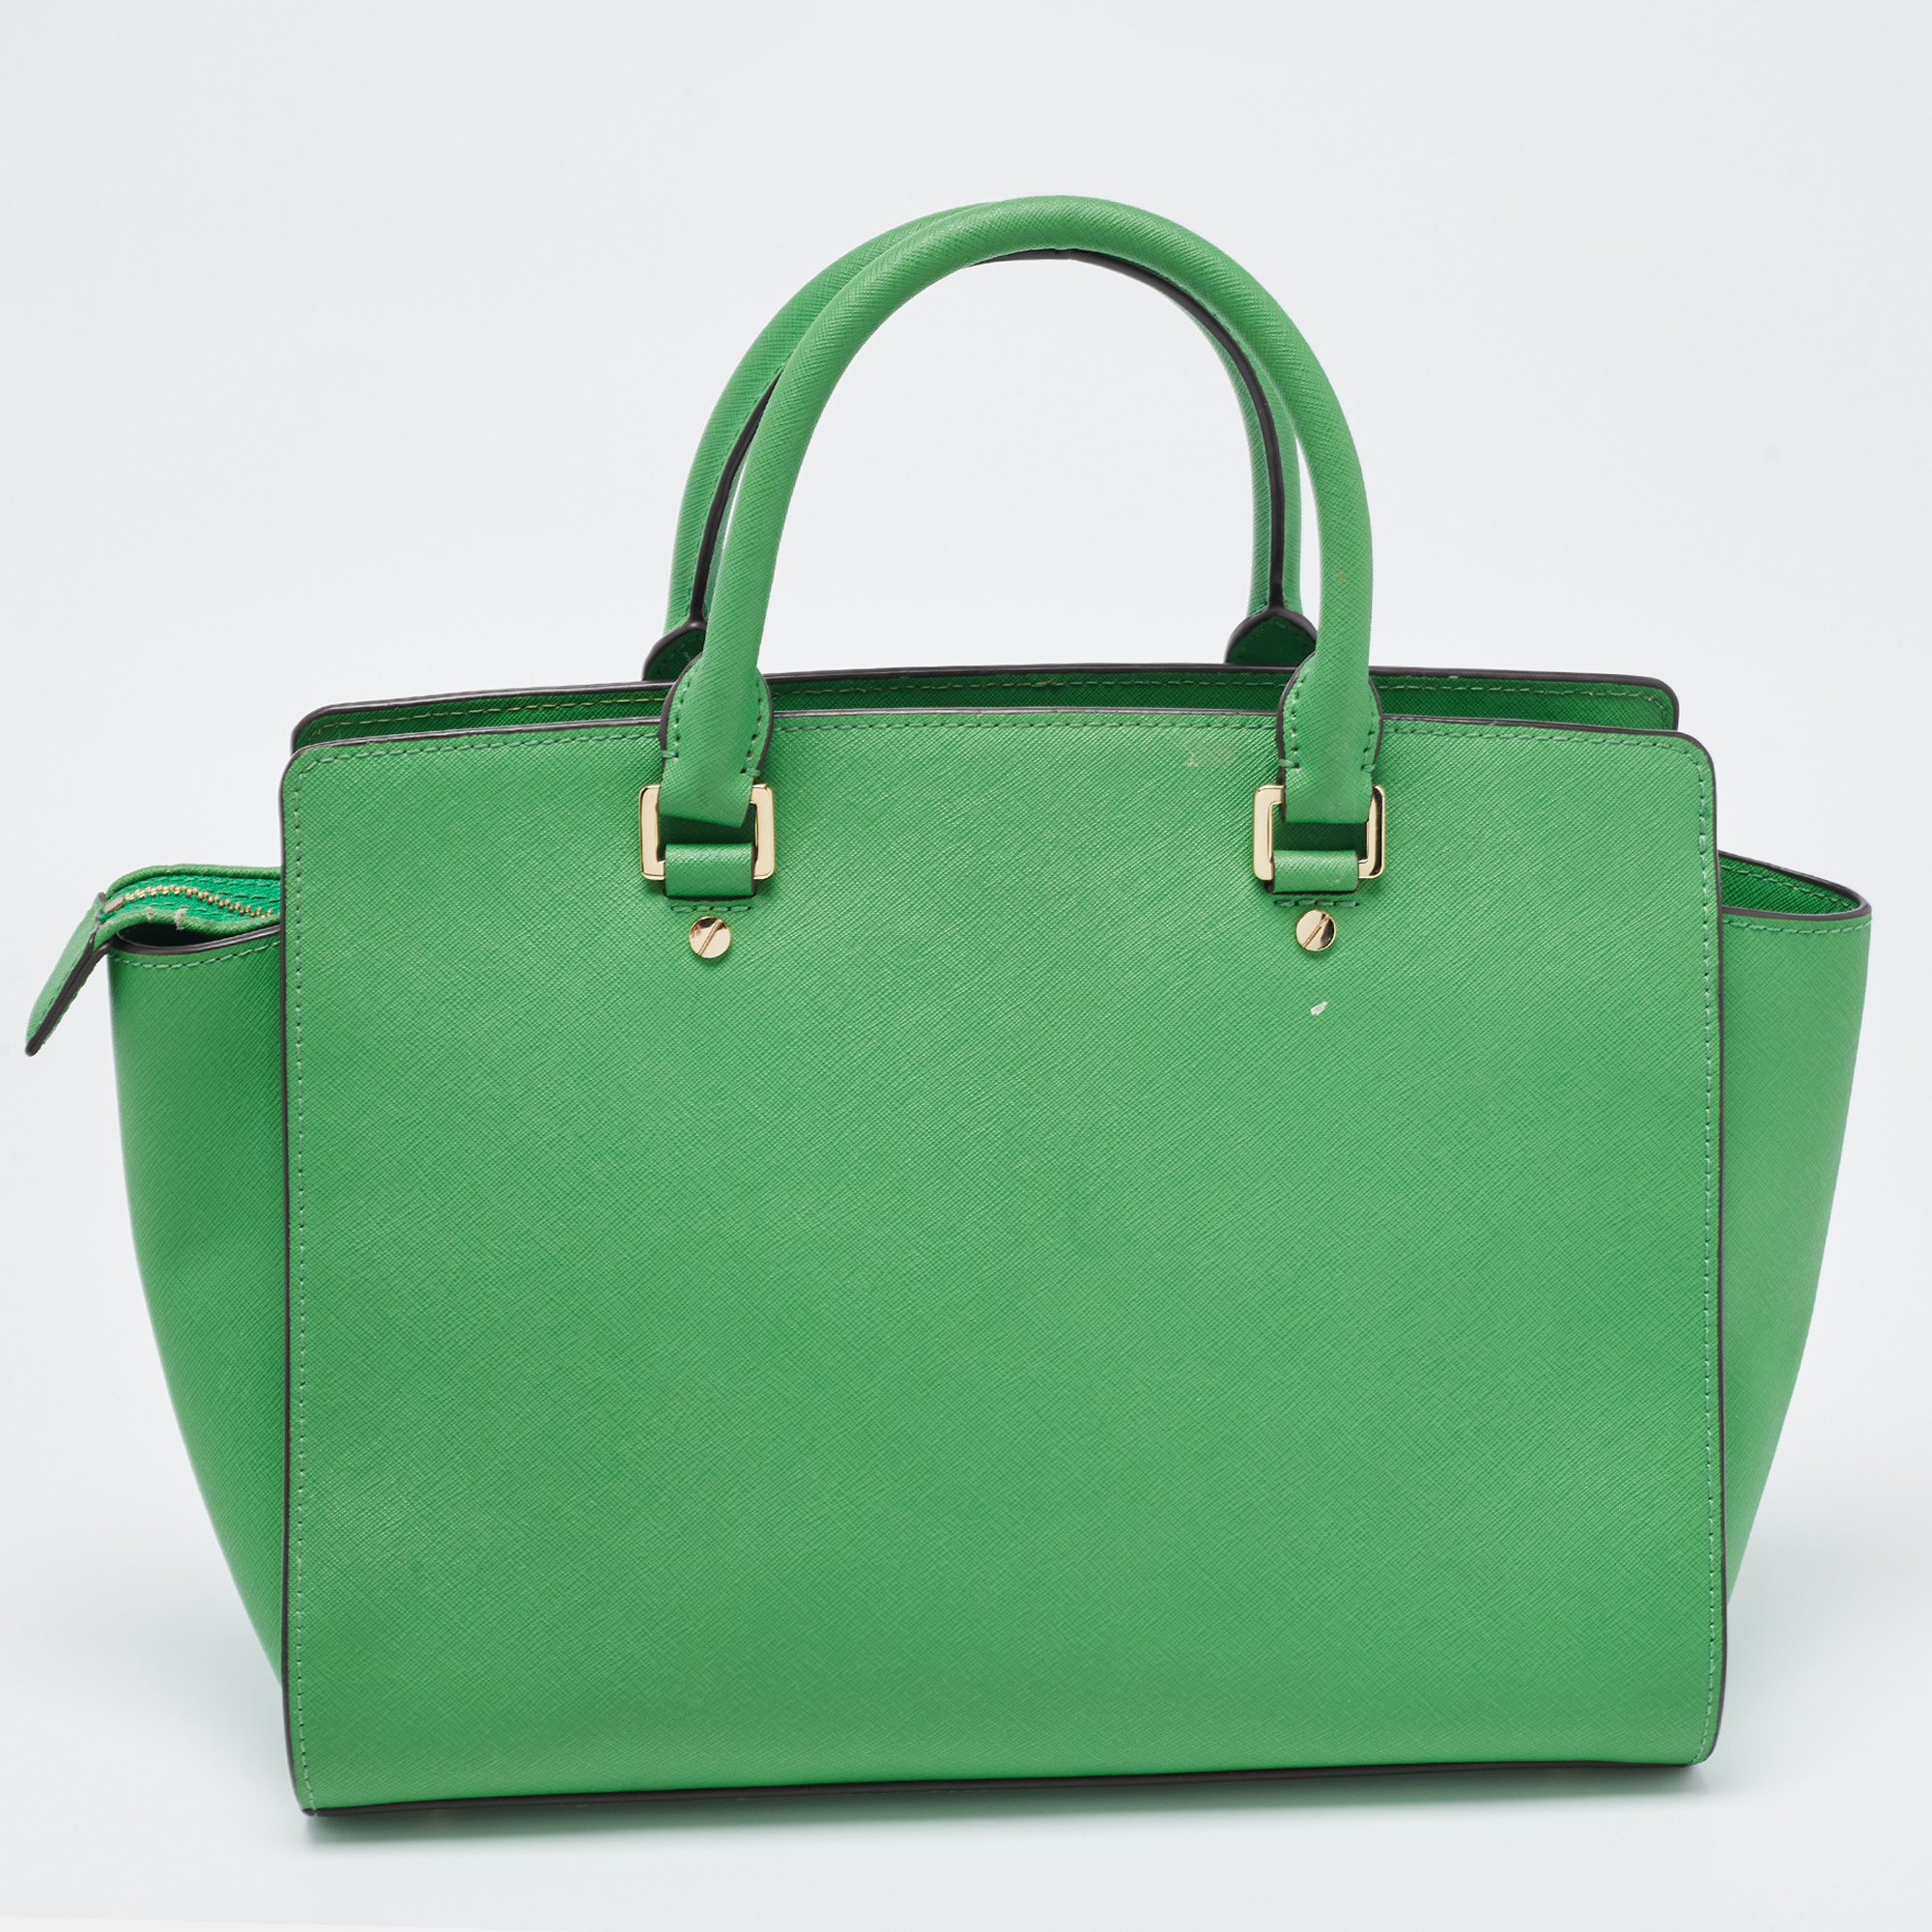 Michael Kors Green Saffiano Lux Leather Large Selma Tote